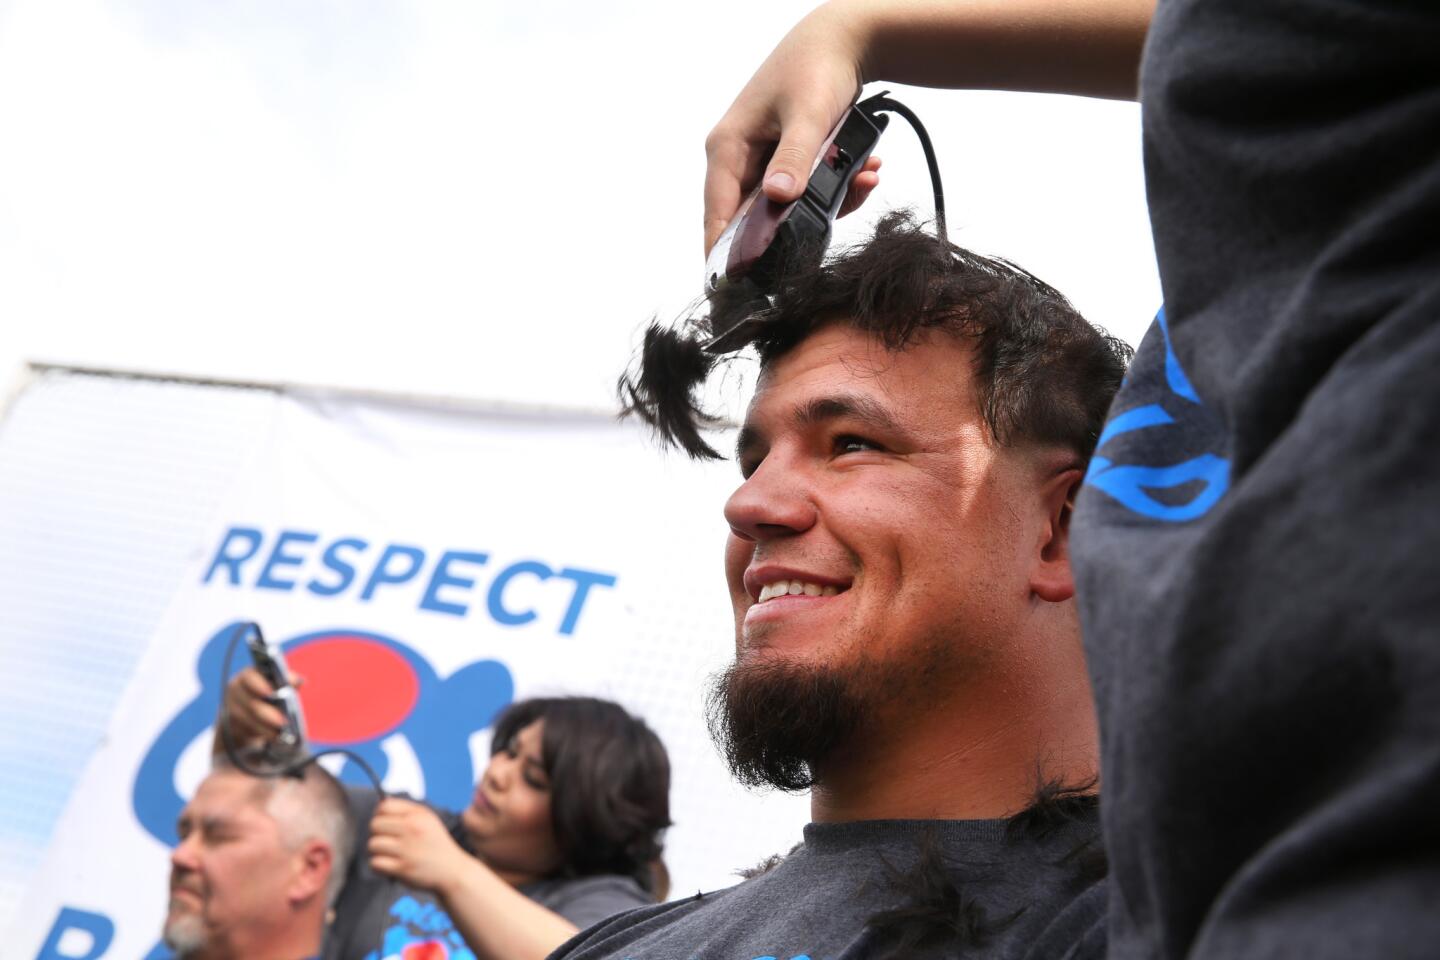 Cubs player Kyle Schwarber has his head shaved as he and other members of the organization participated in the Respect Bald Fundraiser prior to a preseason game at Sloan Park in Mesa, Ariz., on Saturday, March 5, 2016. Schwarber, manager Joe Maddon, Anthony Rizzo, and Ben Zobrist were among those who shaved their heads to benefit pediatric cancer research and support.